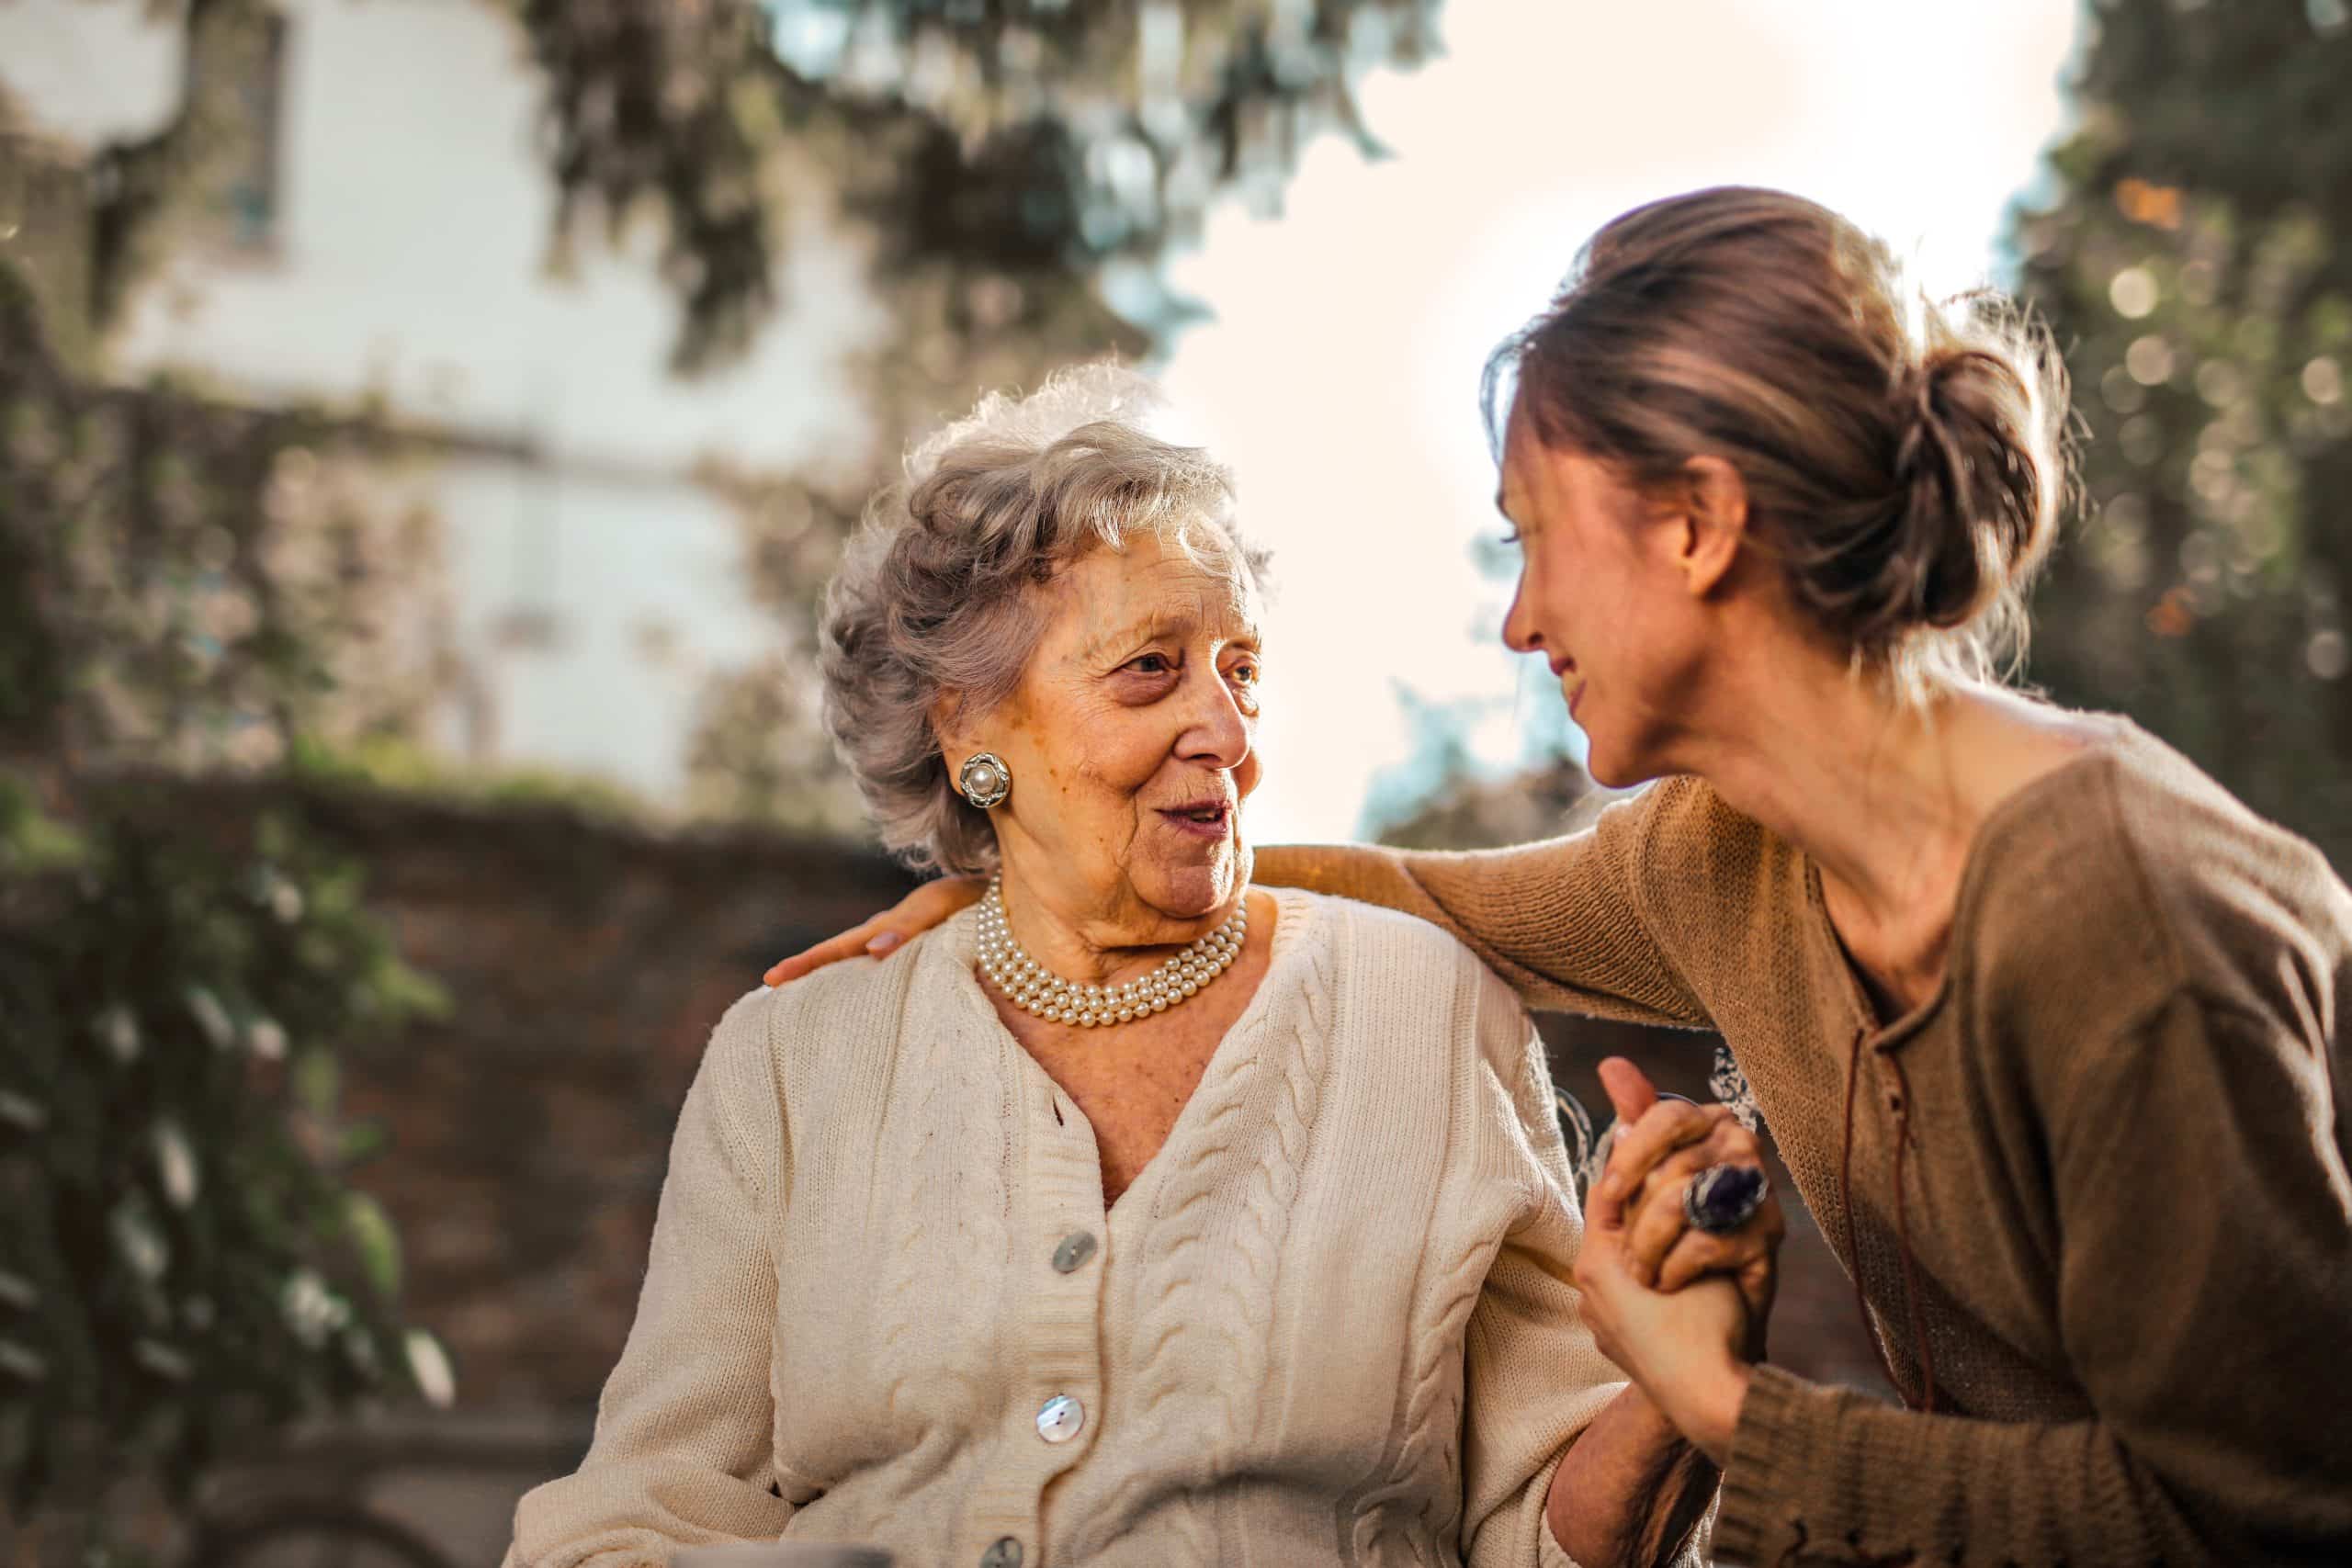 Are Your Employees Caring for Aging Parents?